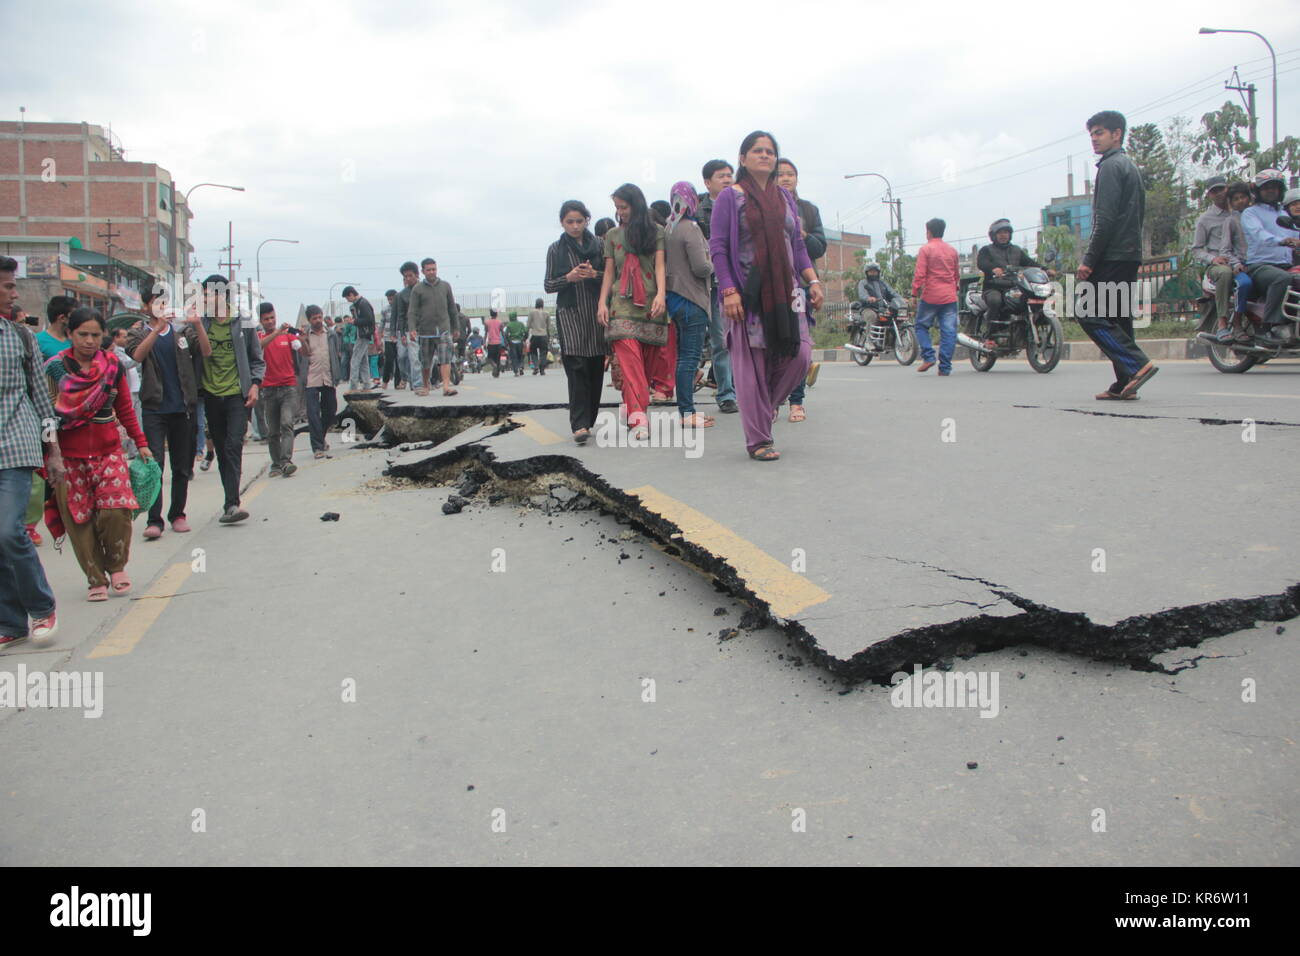 Building damage in 2015 Earthquake in Nepal Stock Photo